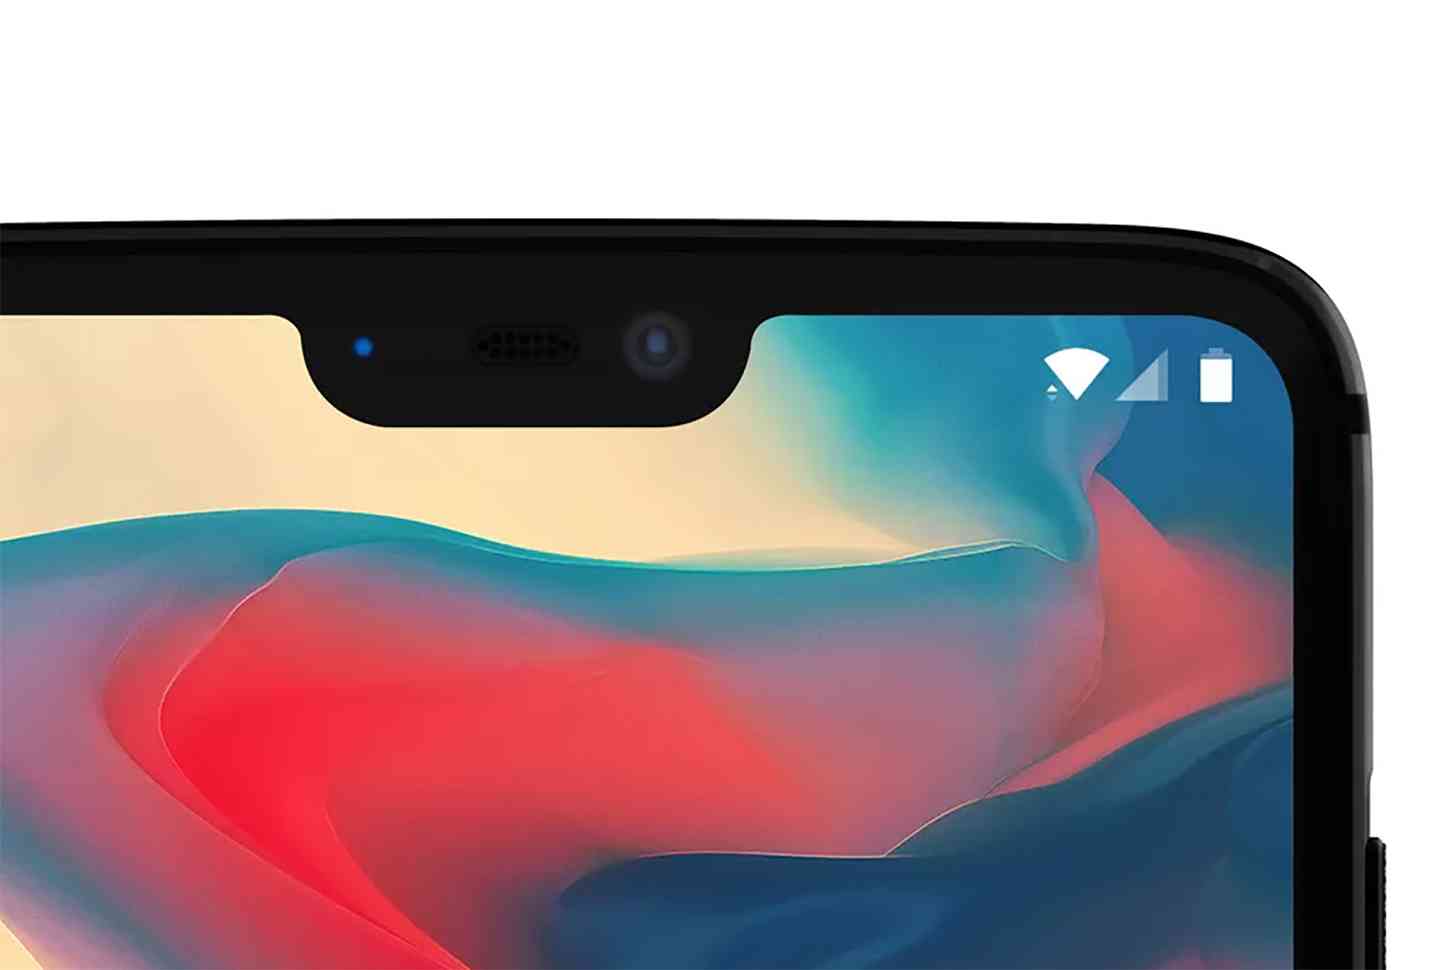 OnePlus 6 not display official